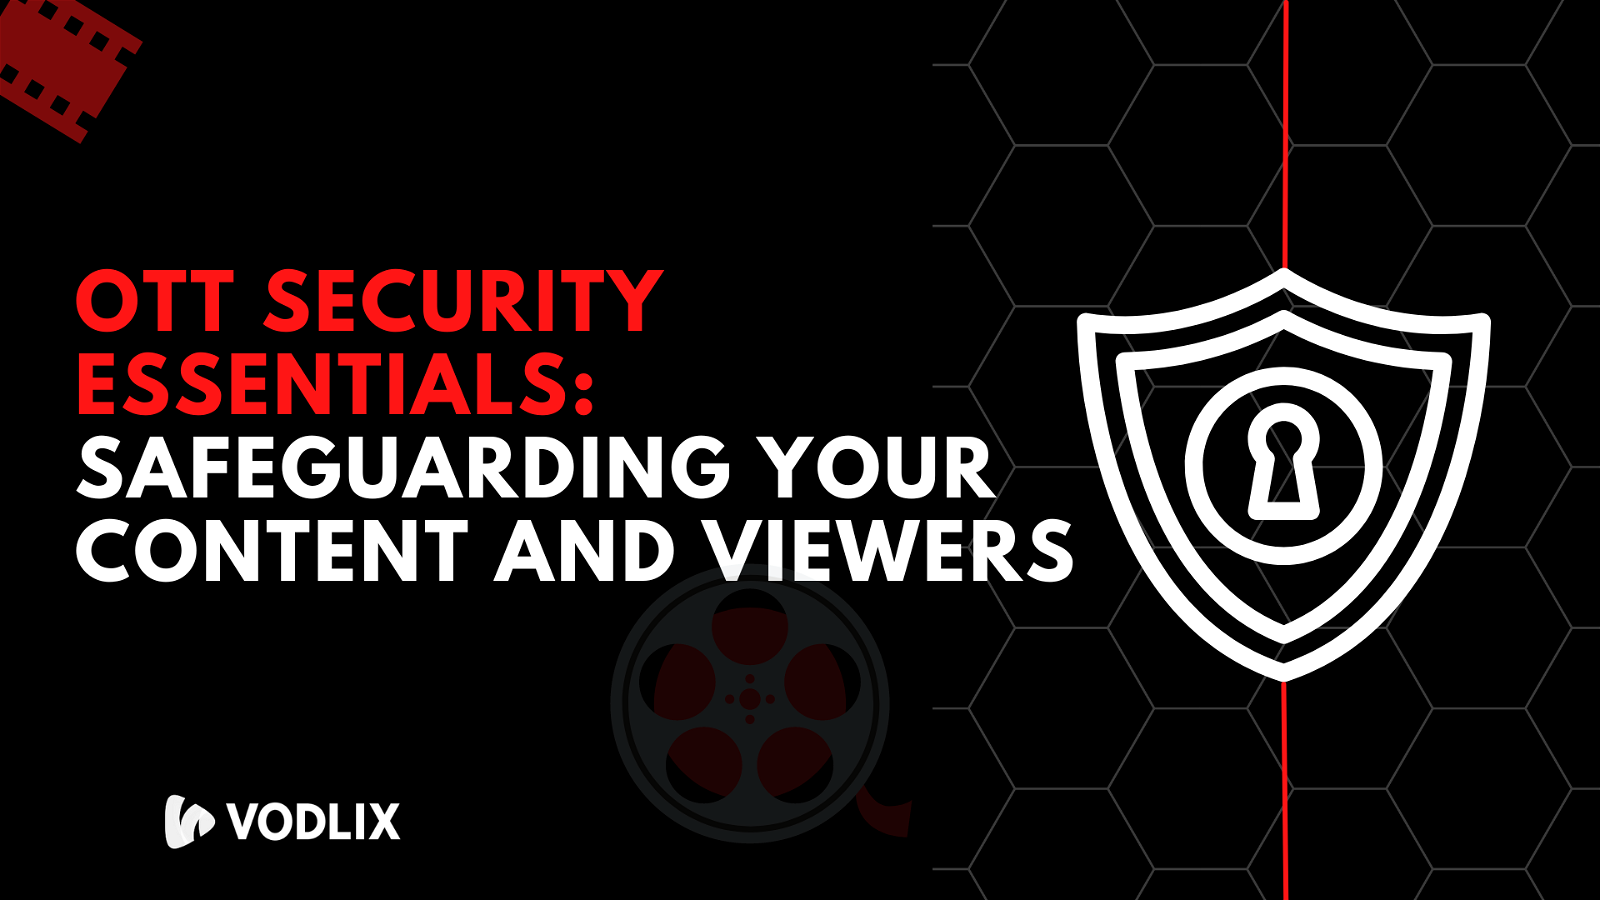 Vodlix OTT Security Essential: Safeguarding Your Content and Viewers